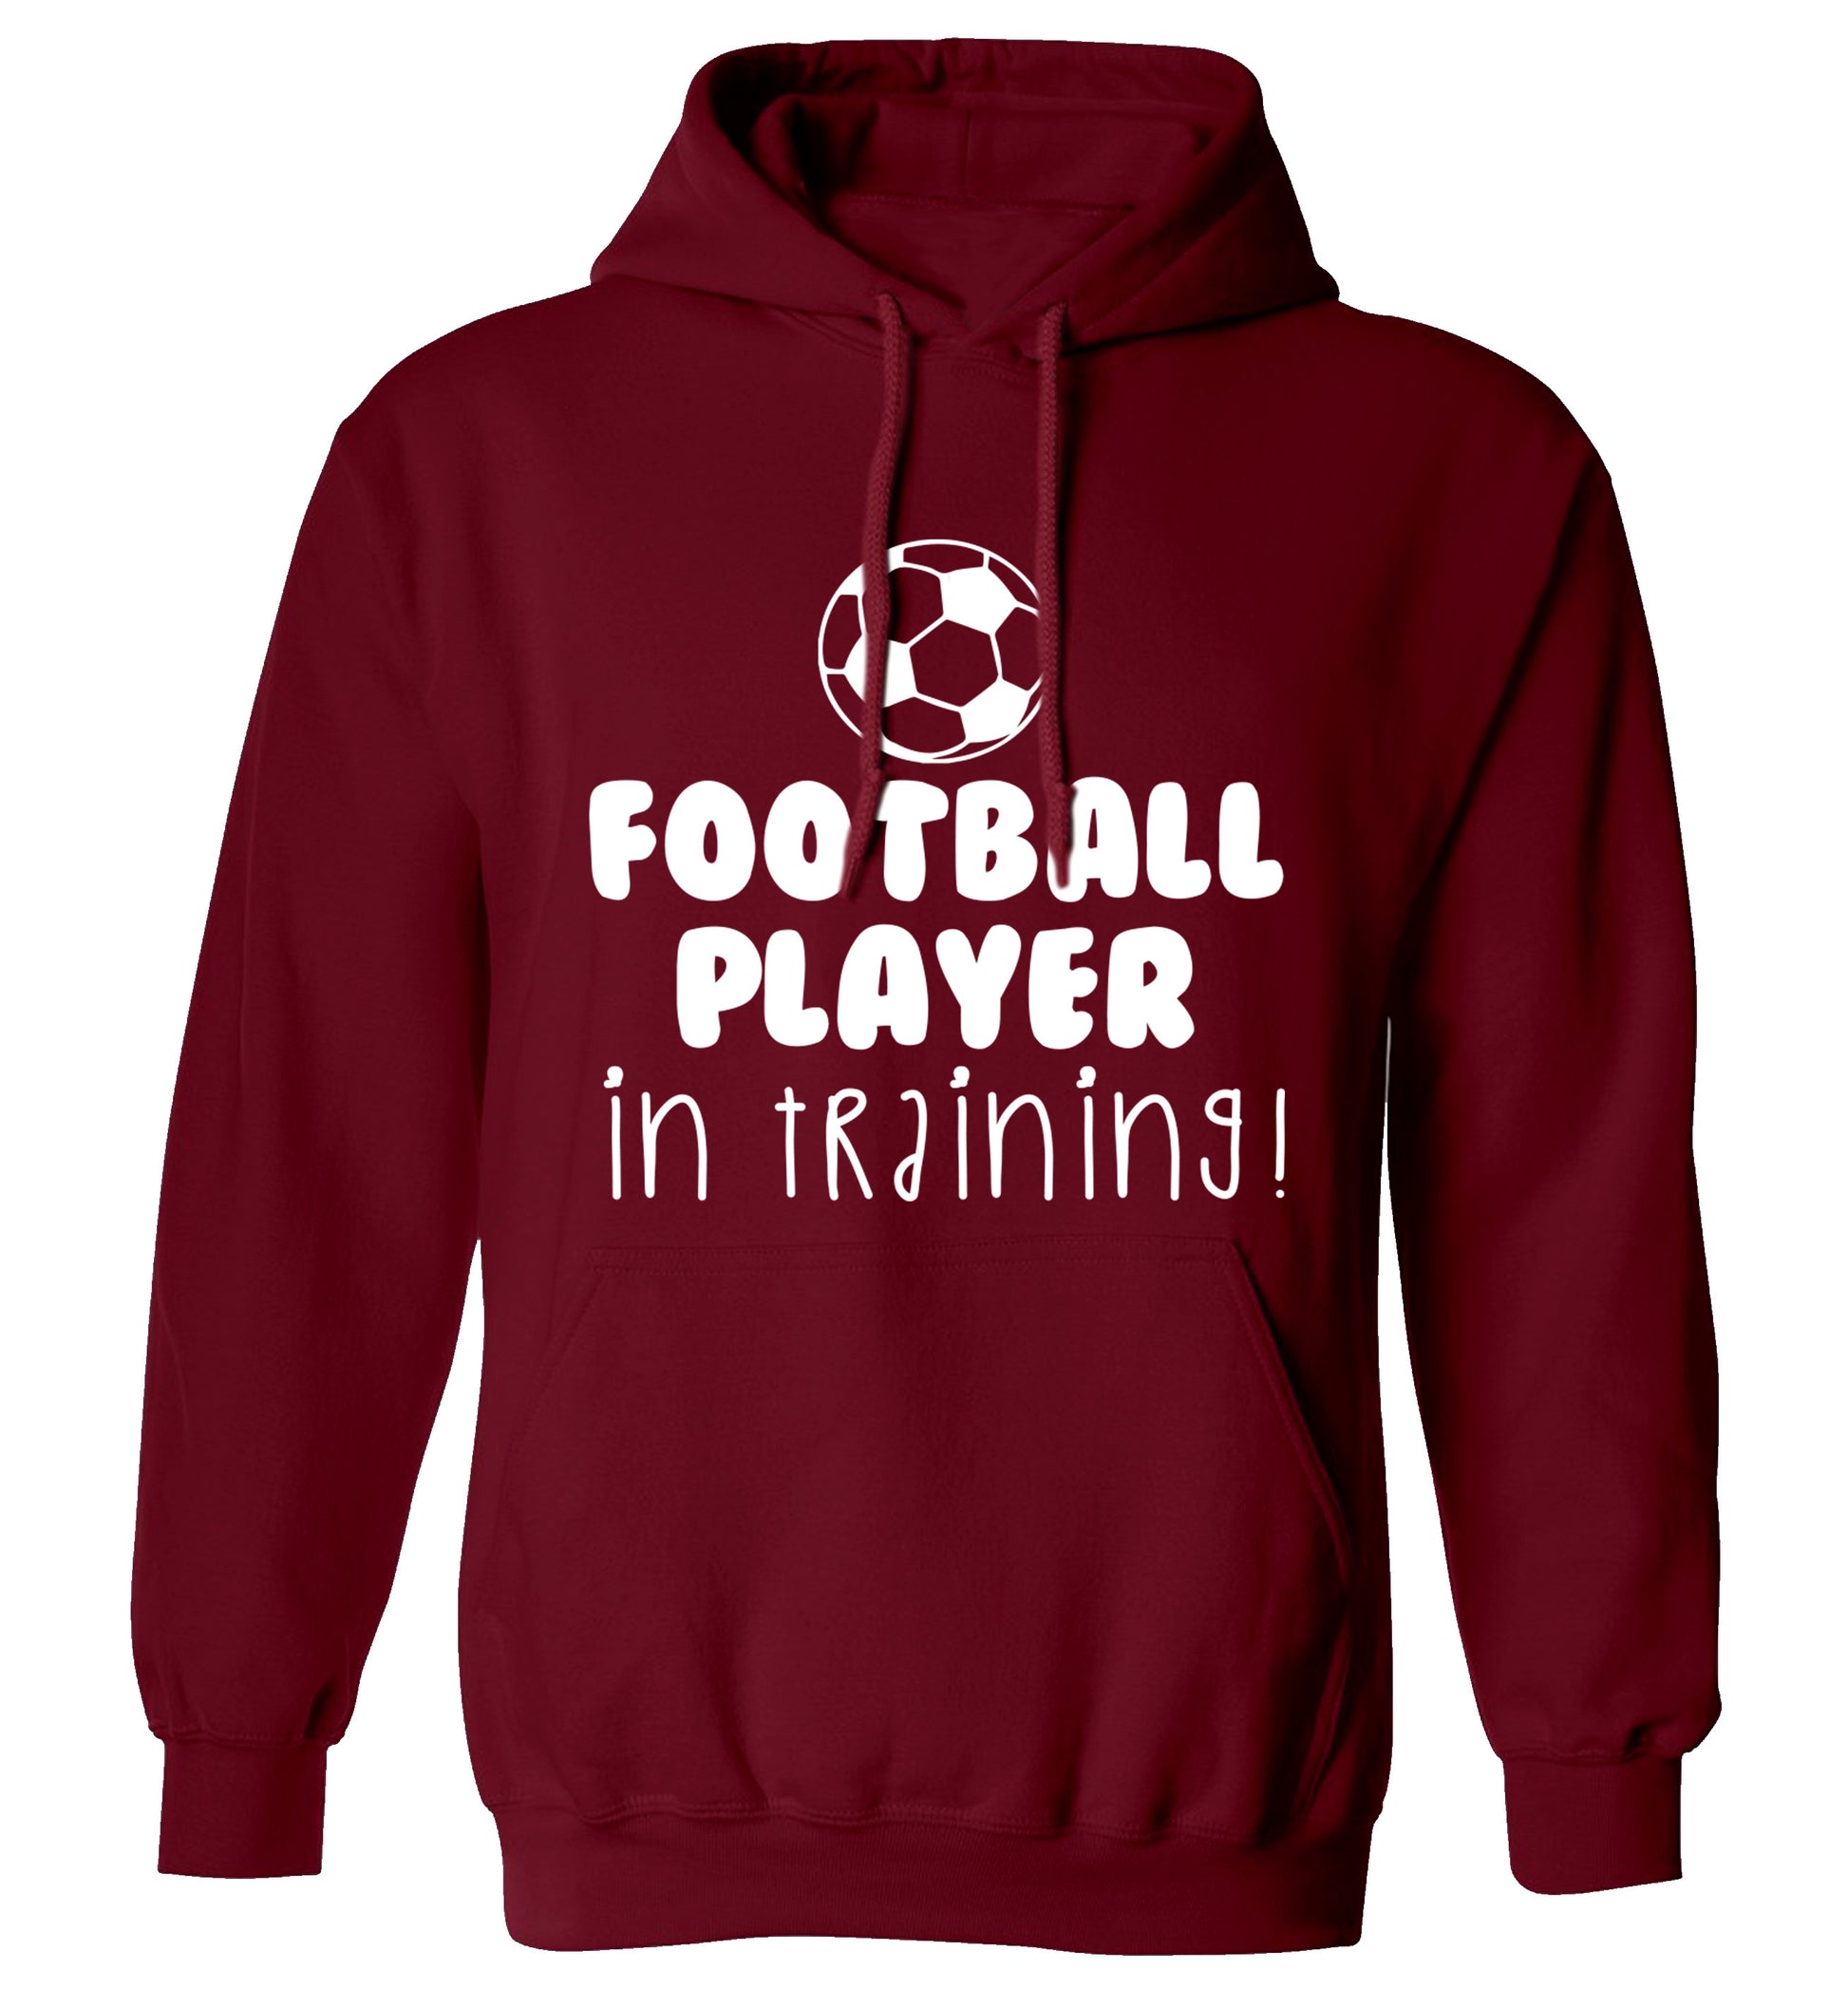 Football player in training adults unisex maroon hoodie 2XL